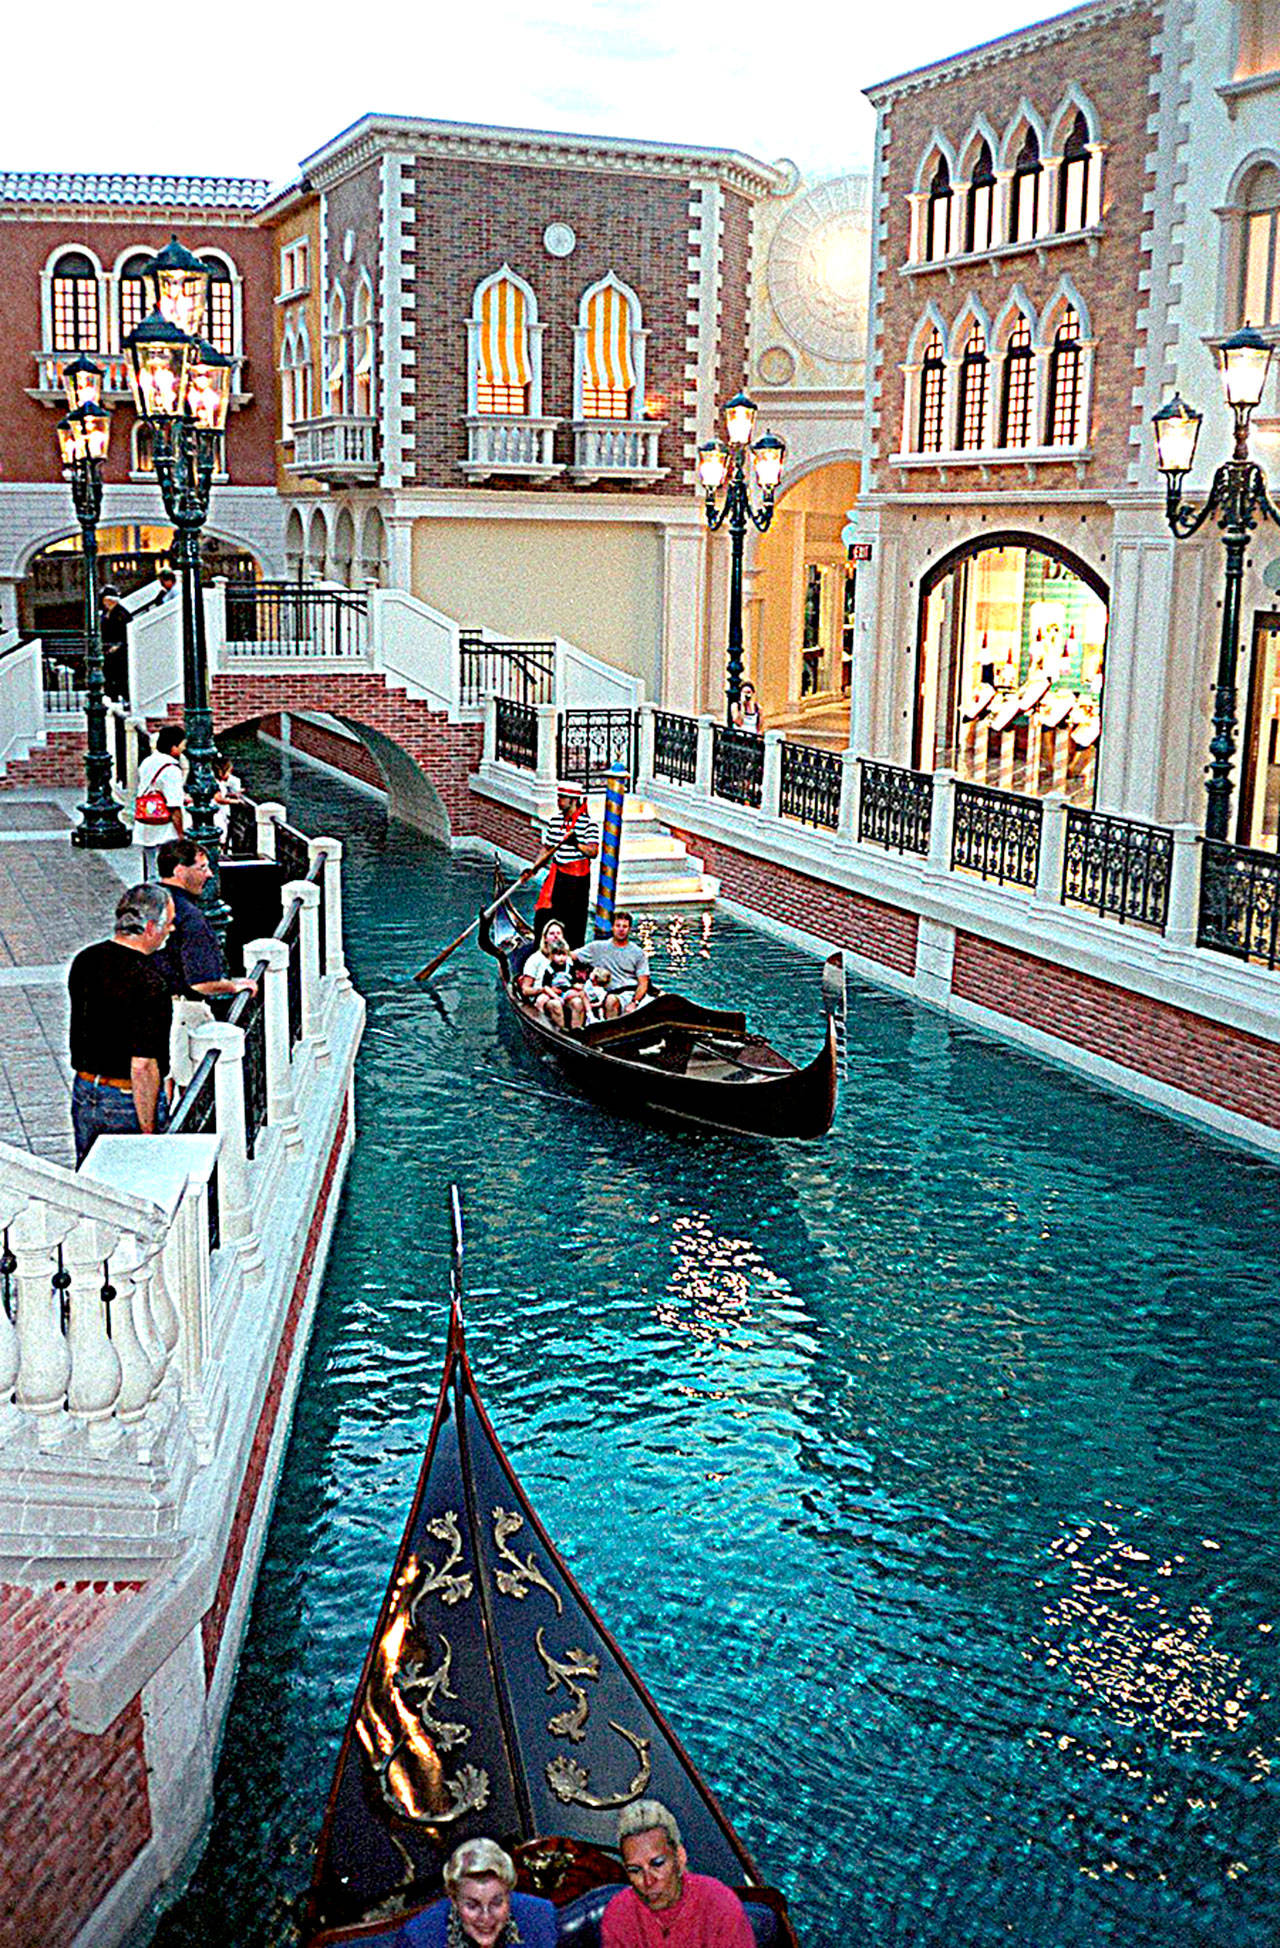 The $1.5 billion Venetian was among the most expensive hotels in the world when it opened in 1999. Eight years later, Casino magnate Sheldon Adelson added the Palazzo, a $1.8 billion adjacent resort with its own casino. (Howard Shapiro/Philadelphia Inquirer)